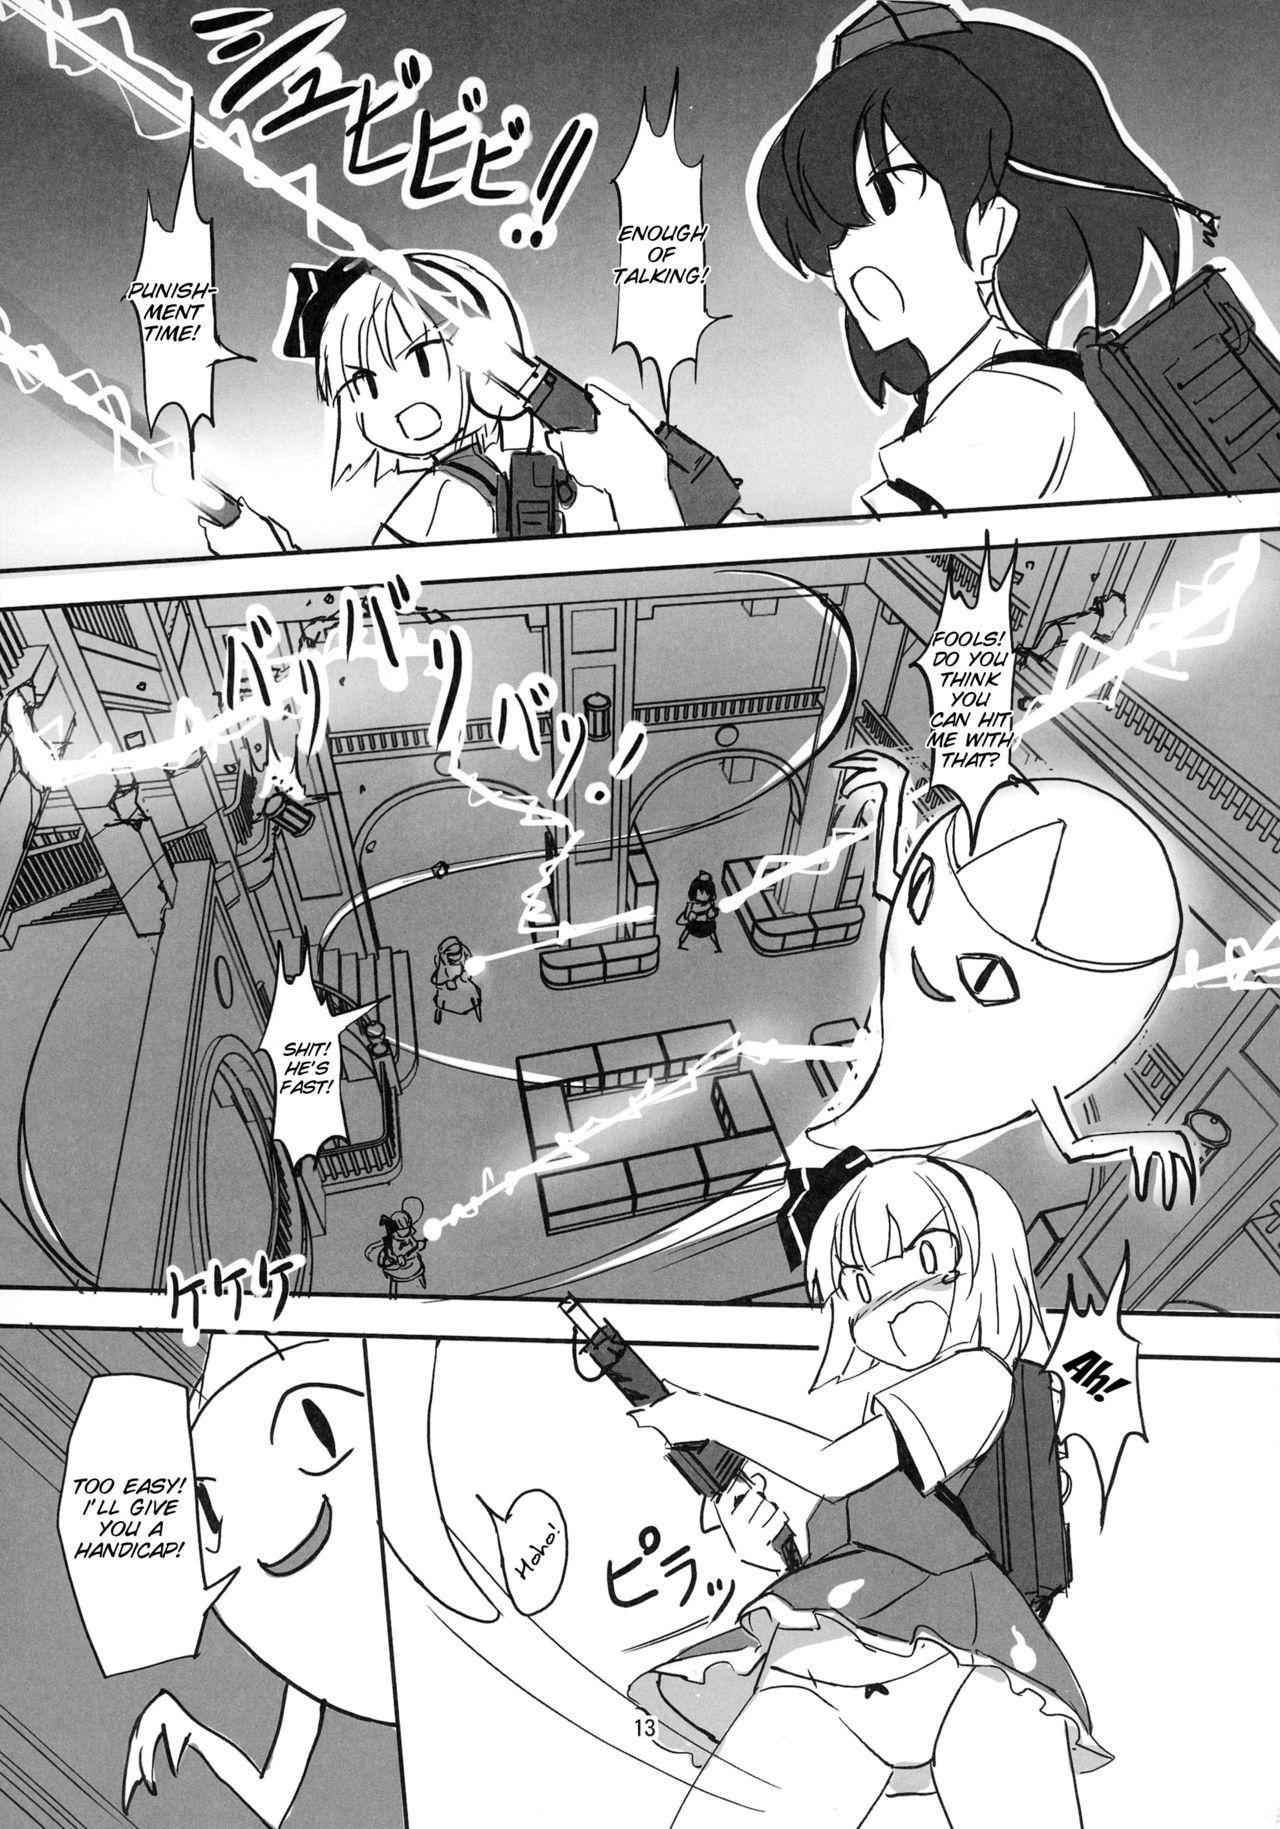 Bus TFC BUSTERS - Touhou project Ghostbusters Pau - Page 14